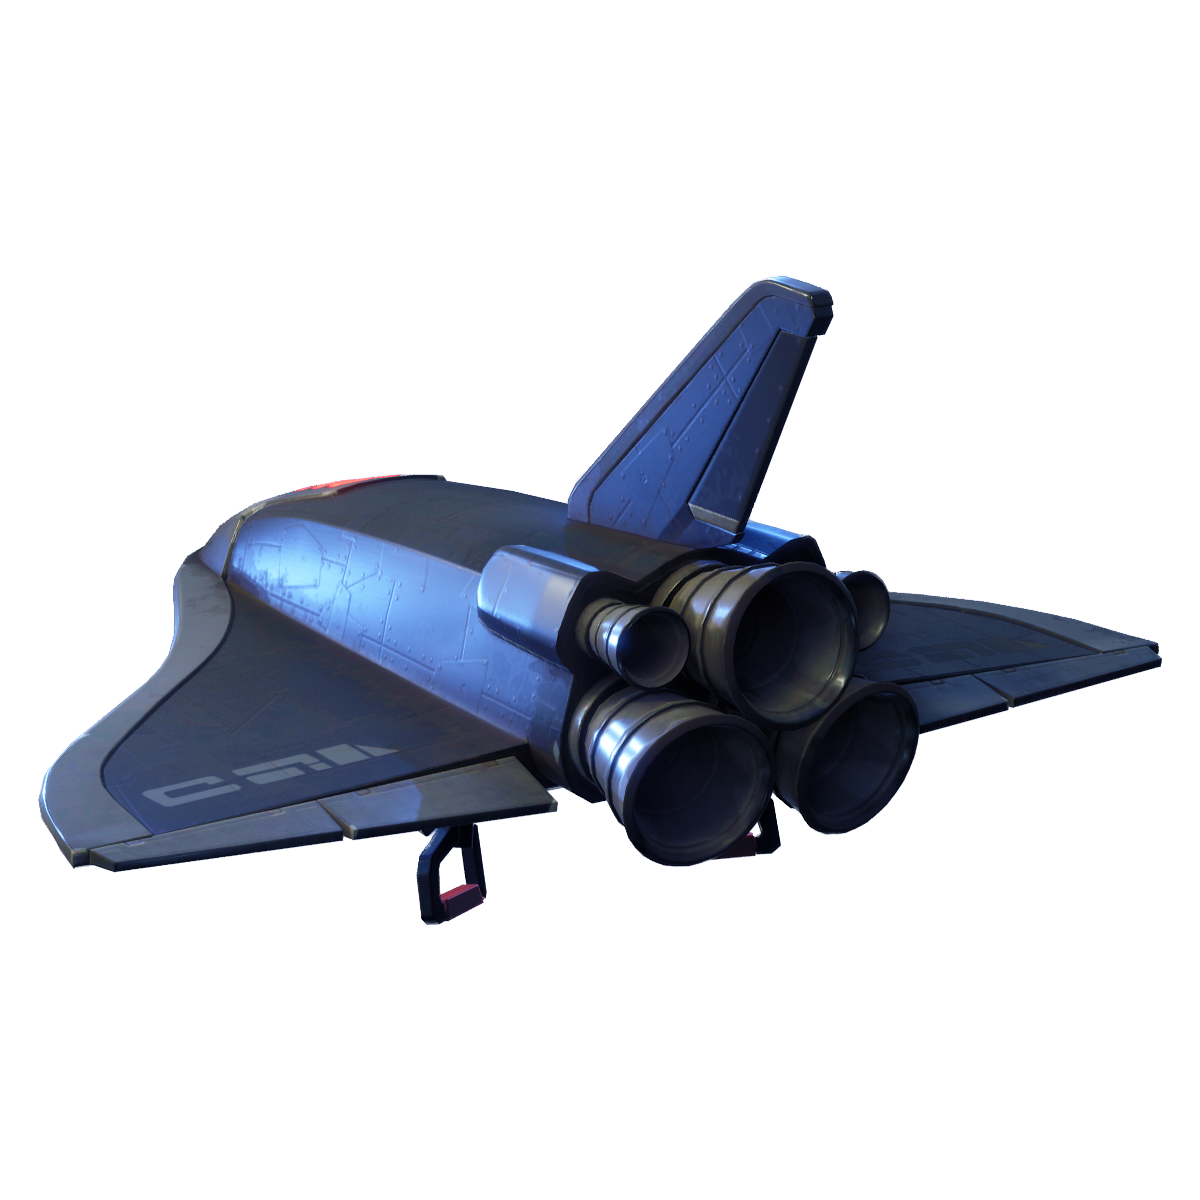 Aircraft Royale Game Fortnite Battle Airplane PNG Image